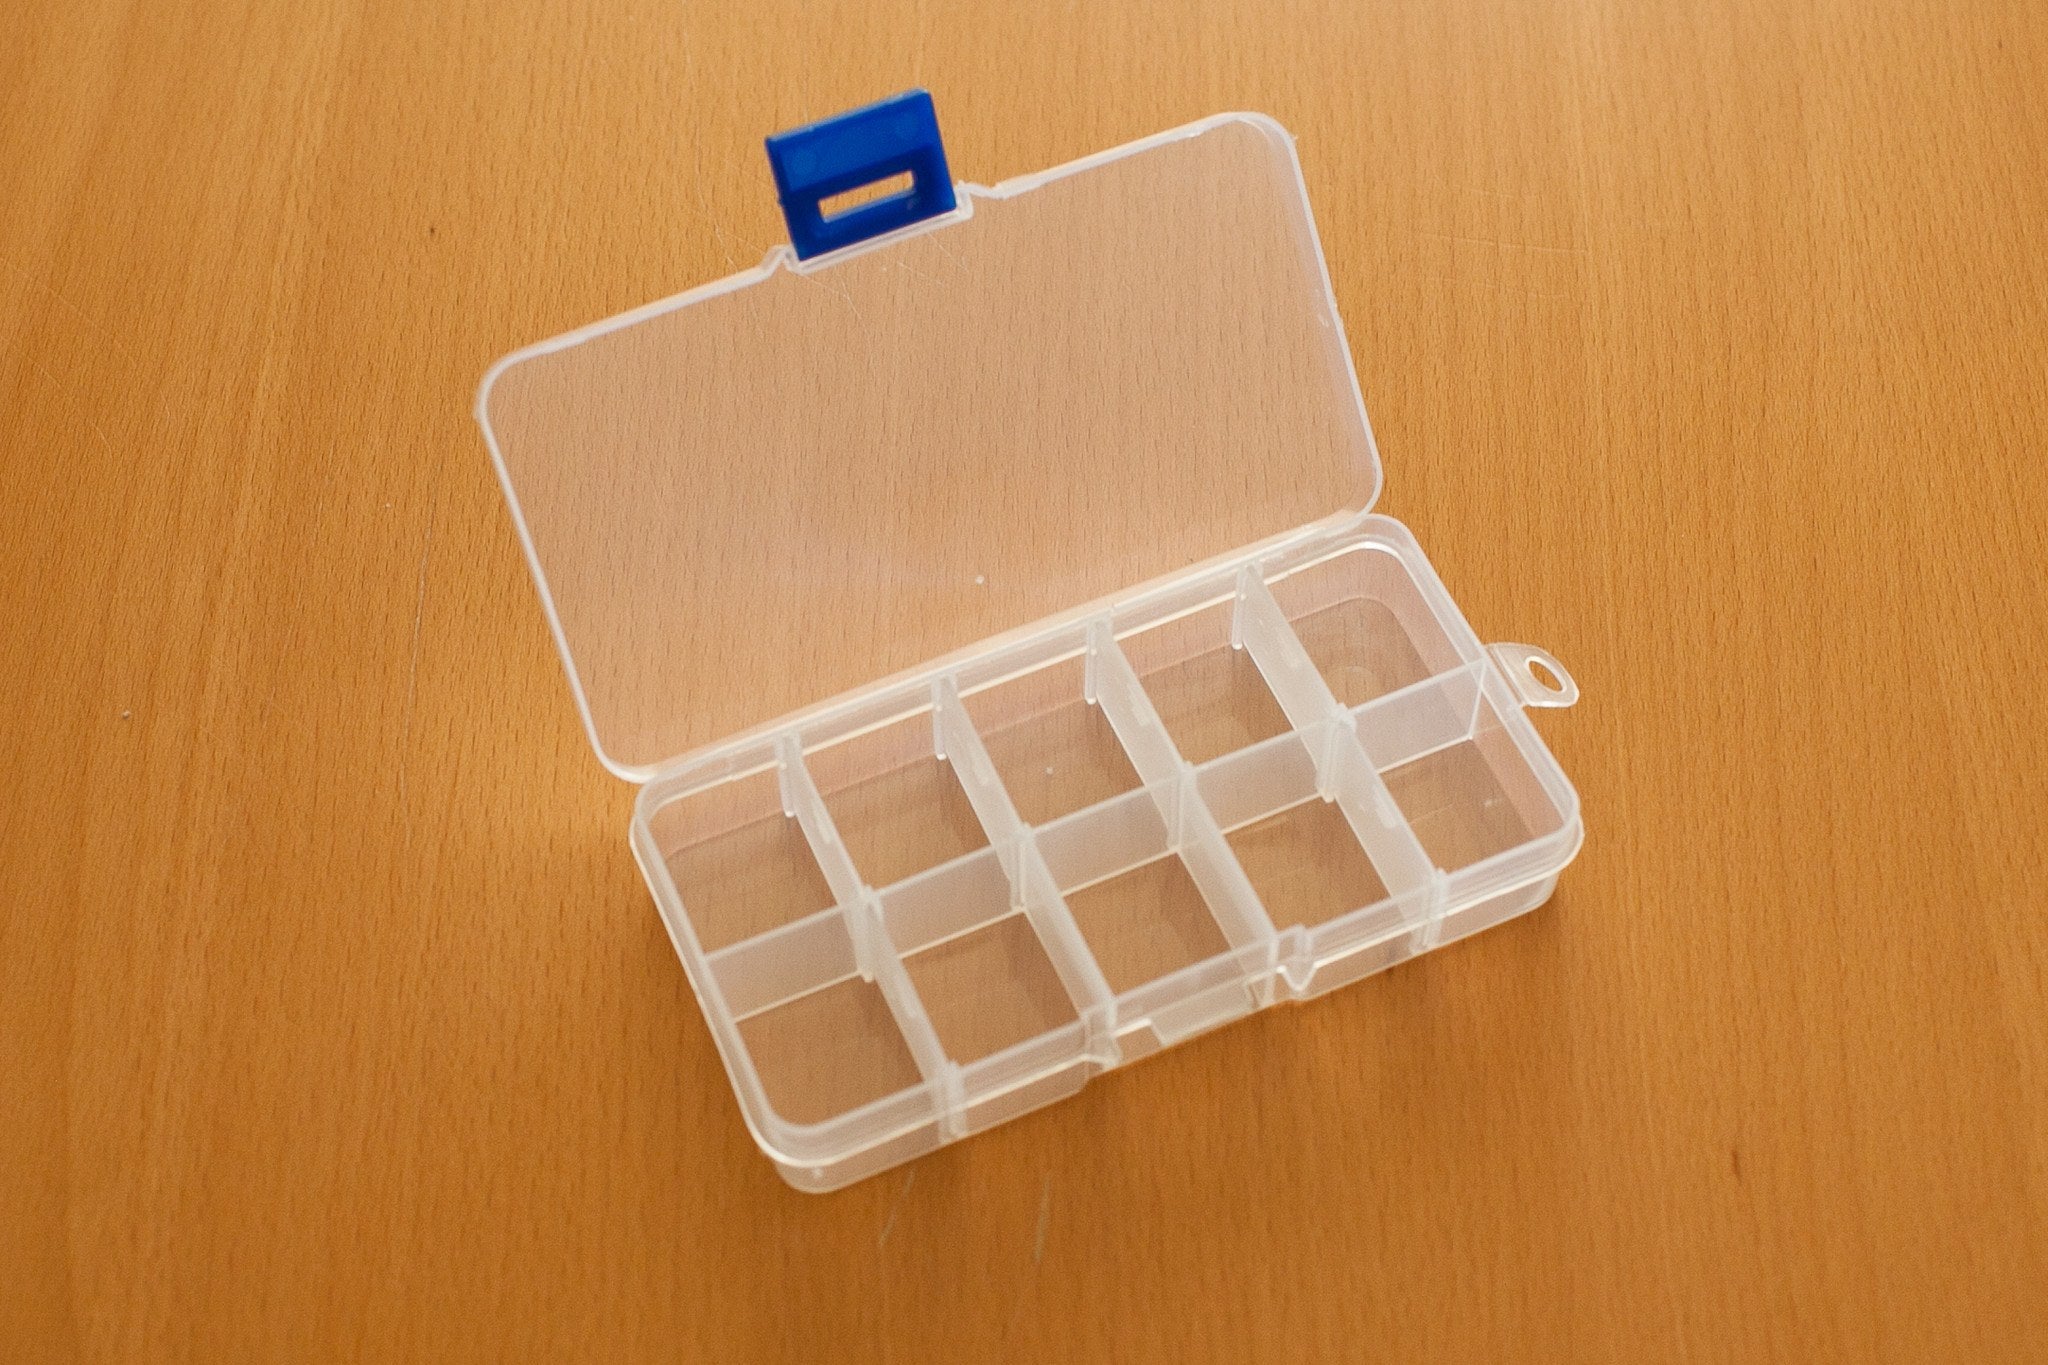 3 Pack Clear Plastic Multipurpose Organizer with 5 Compartments - Caddy Bay  Collection